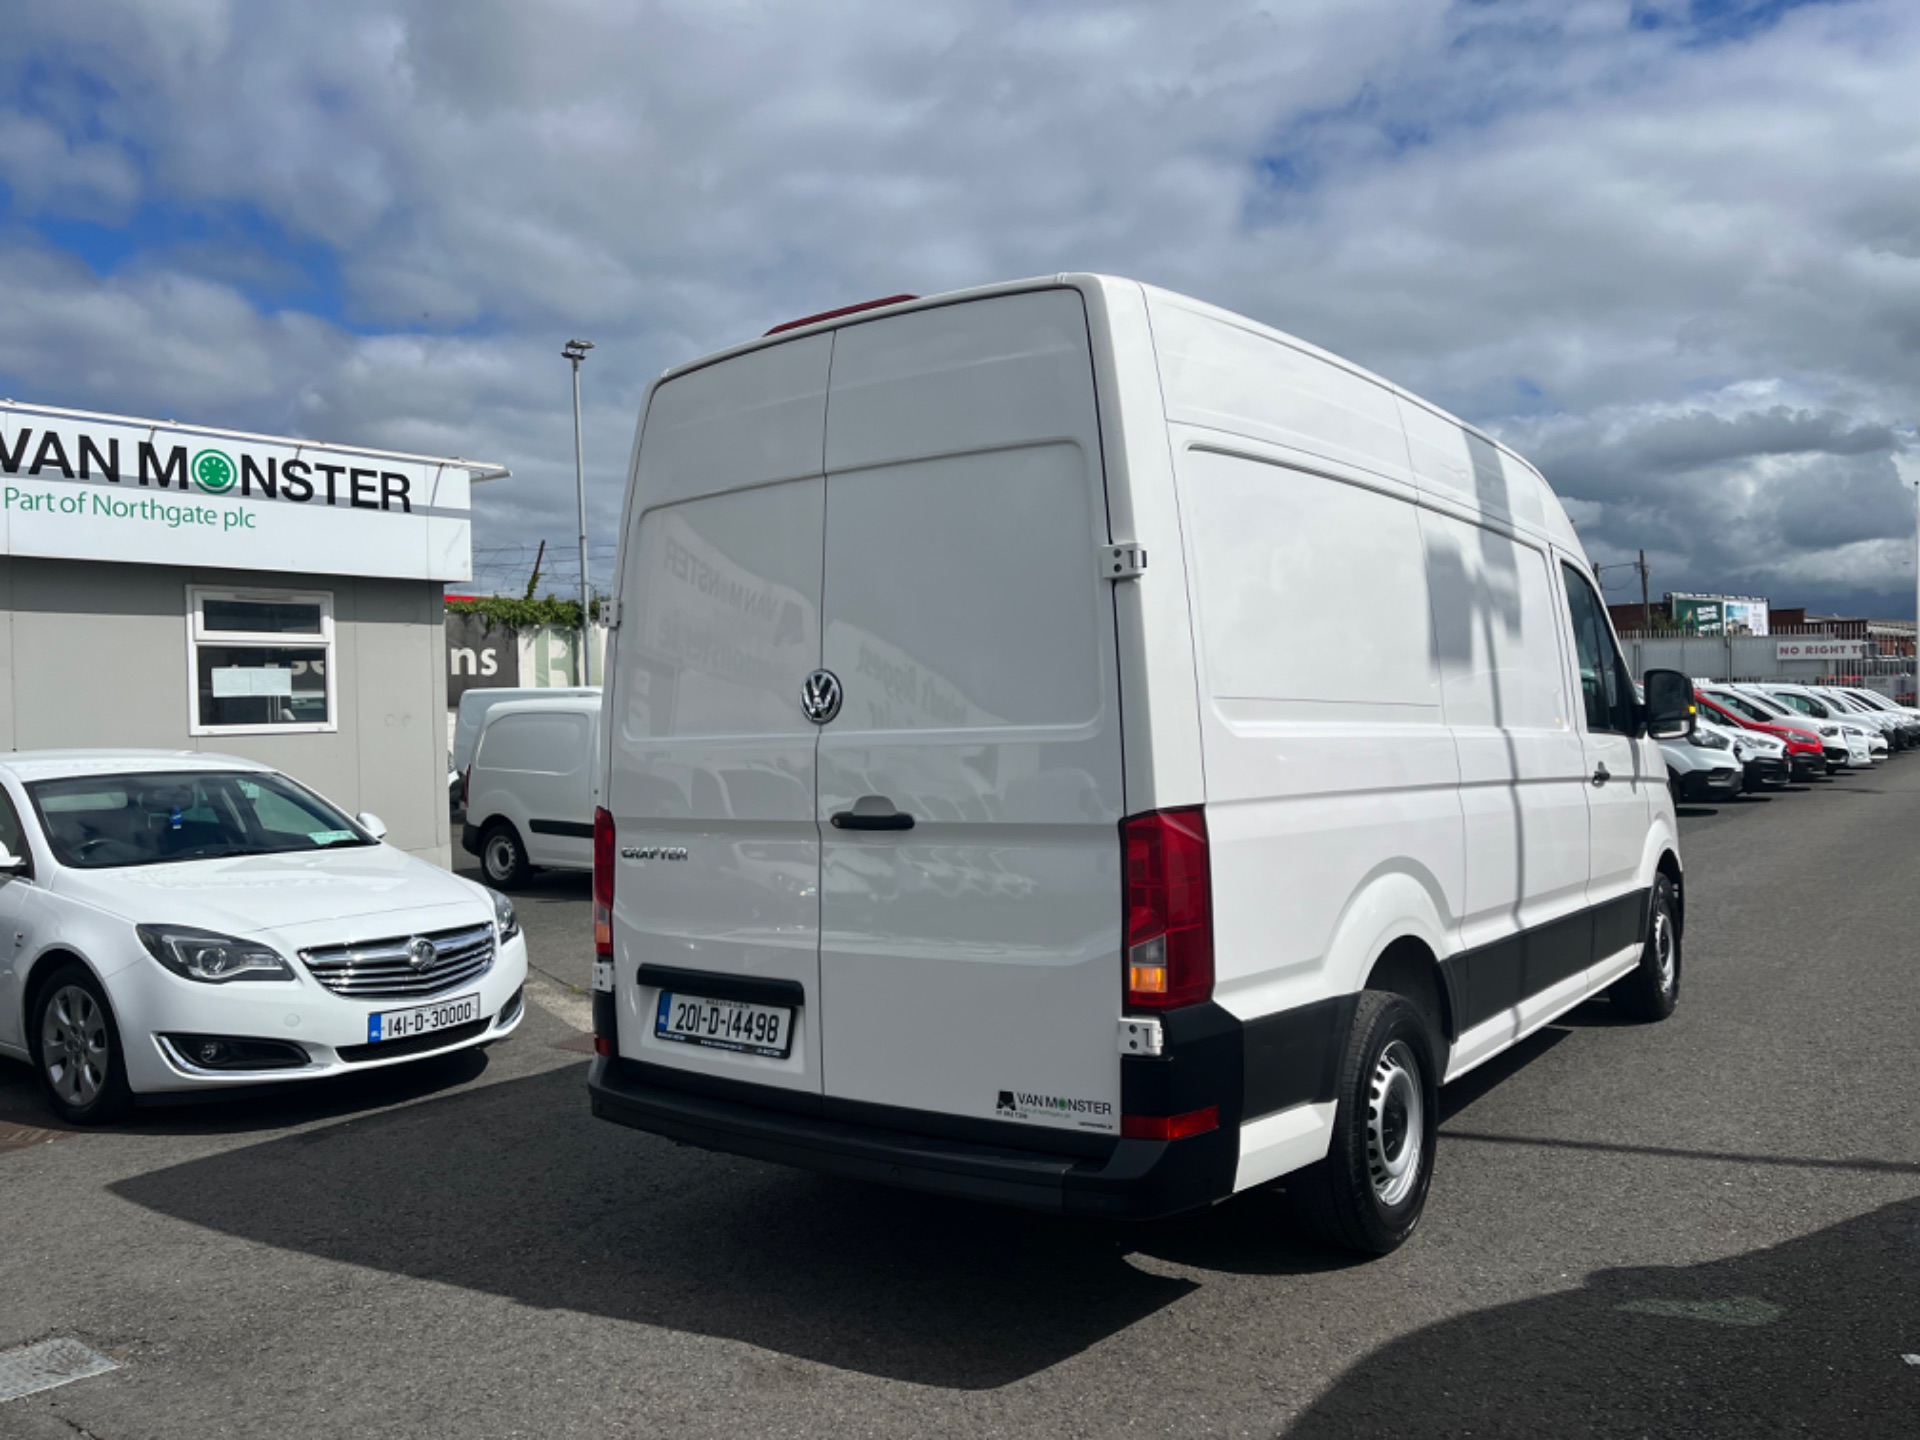 2020 Volkswagen Crafter 35 MWB 140HP M6F 5DR (201D14498) Thumbnail 7